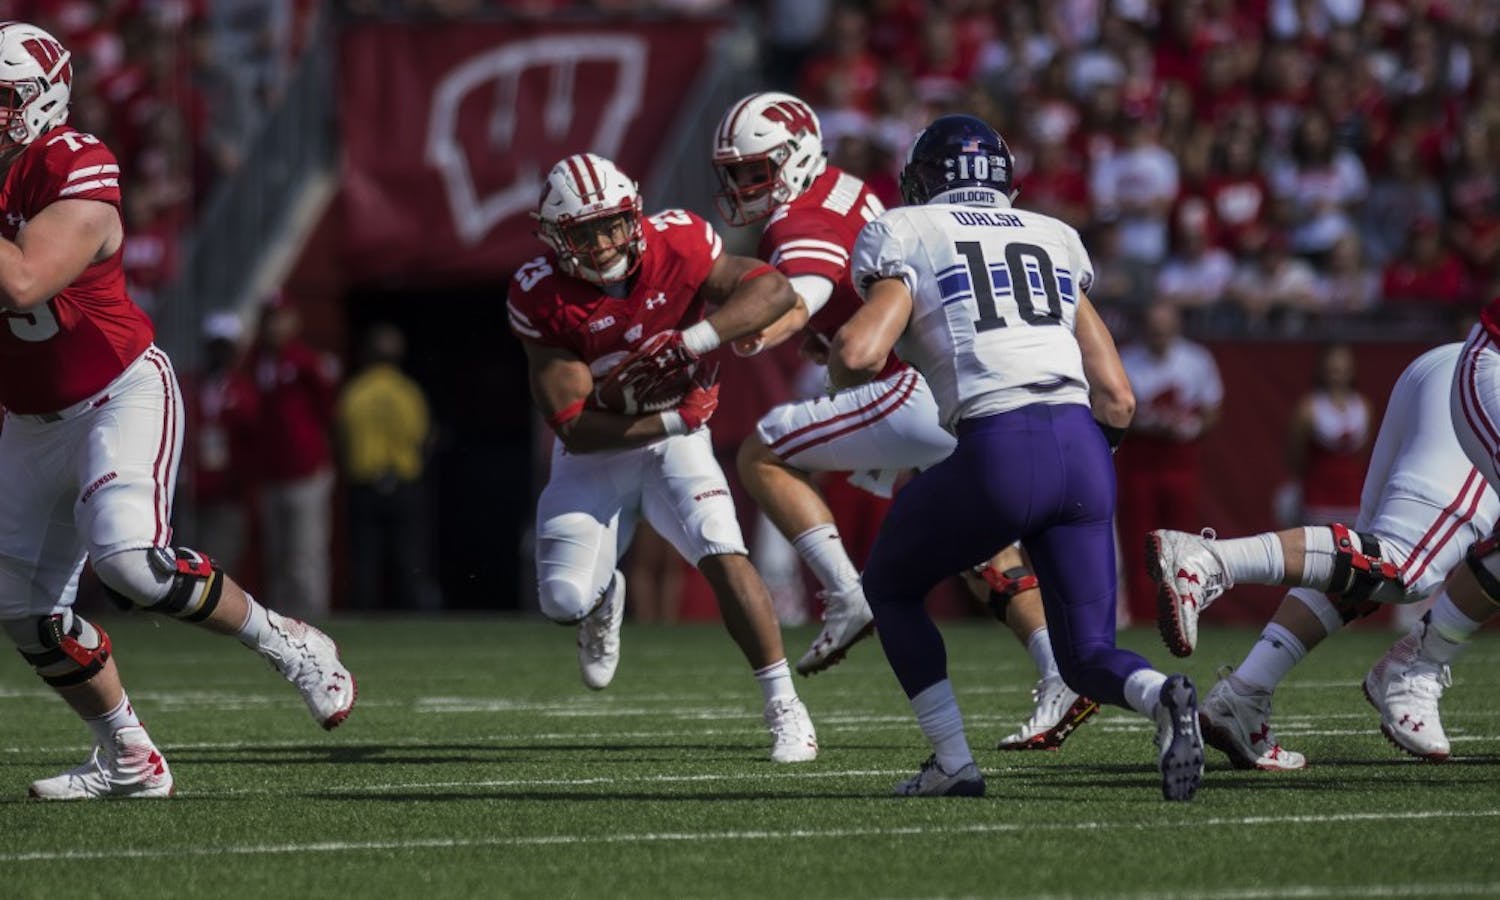 Wisconsin again improved in the second half, outscoring Northwestern by 12 points.